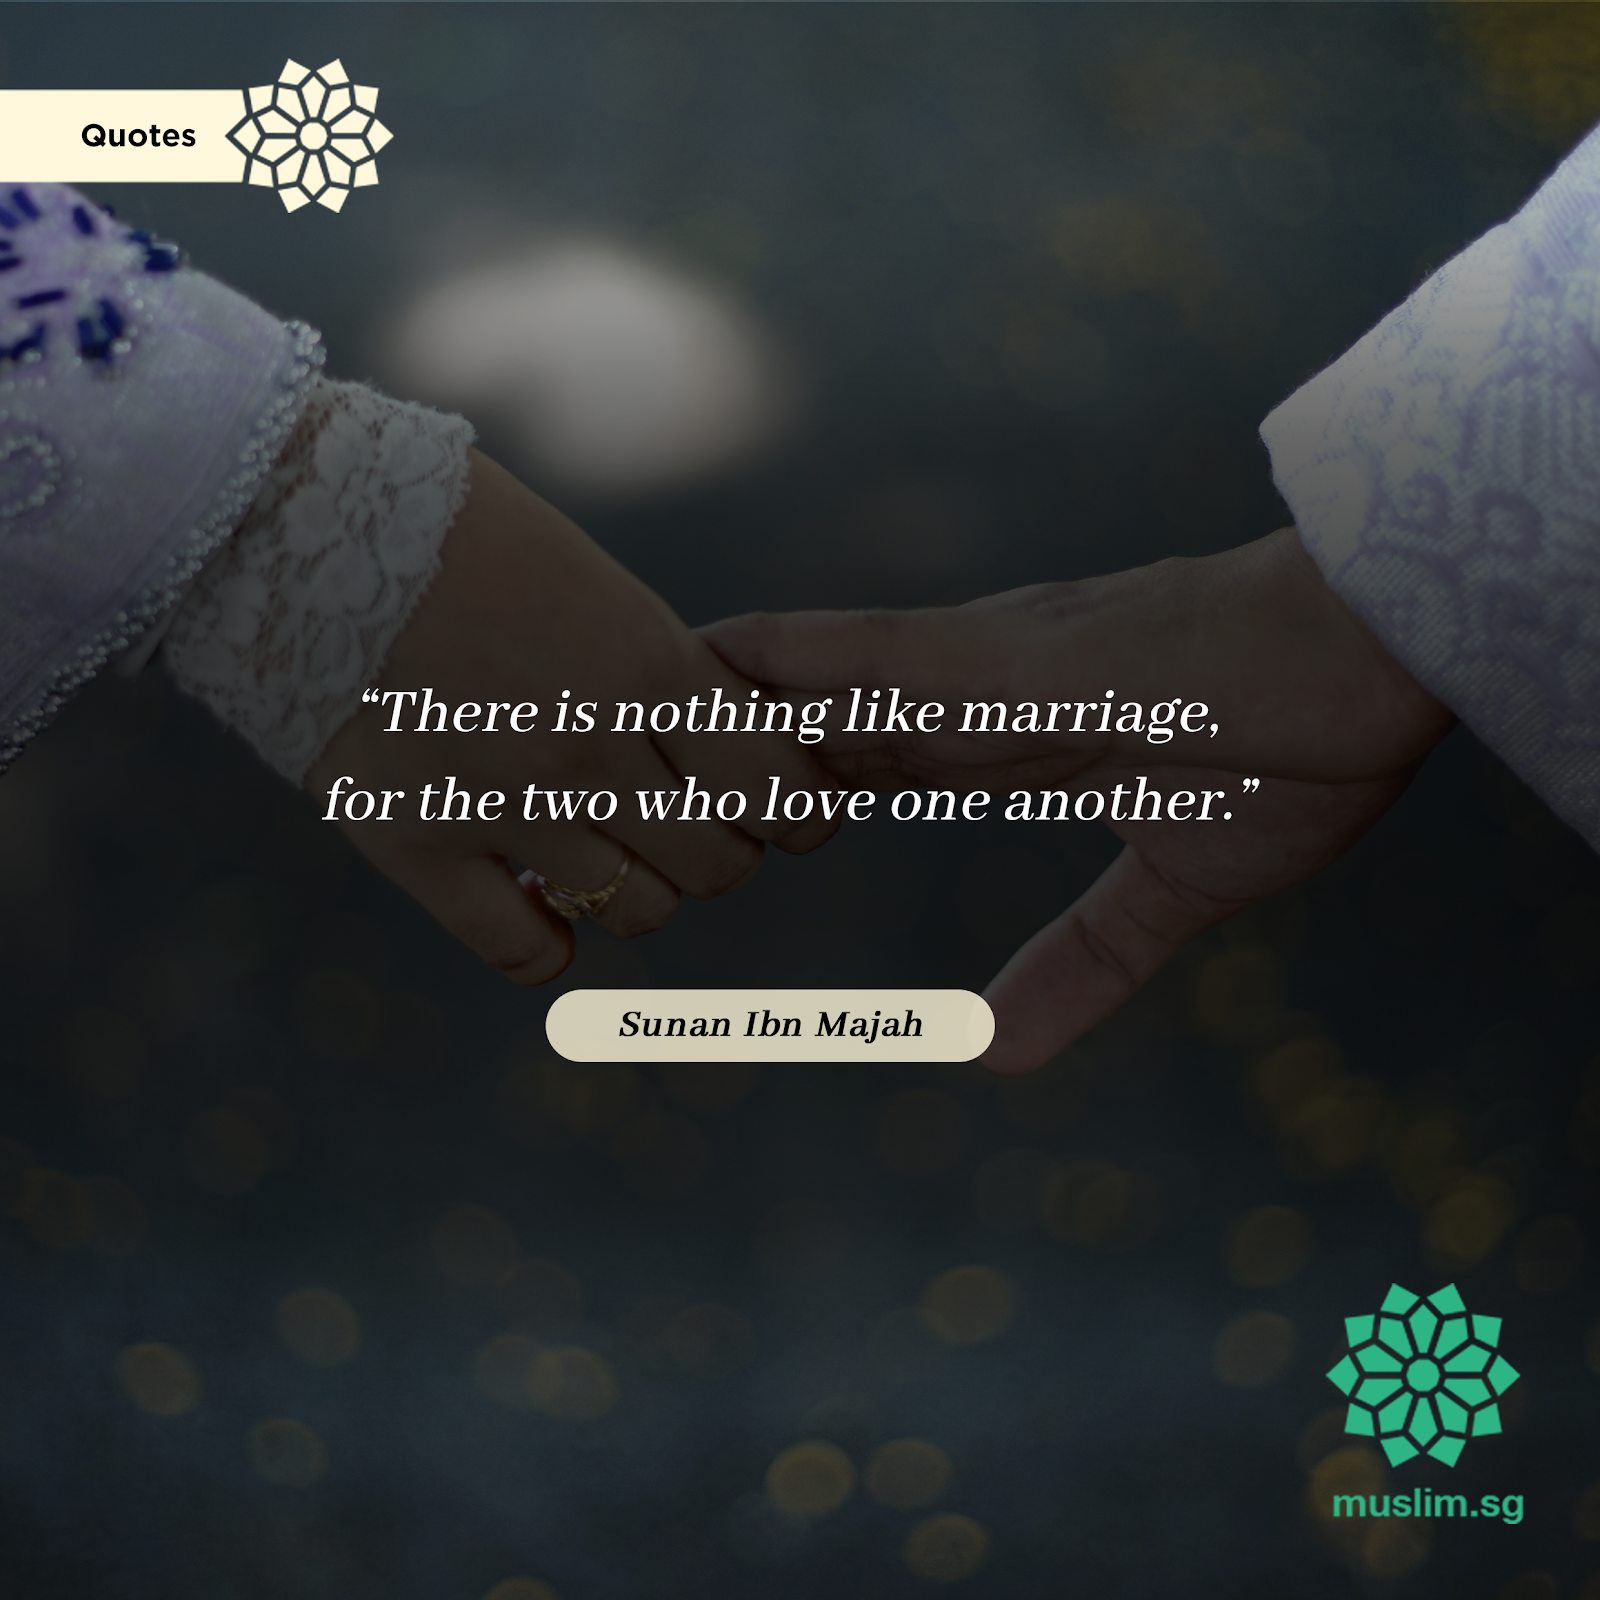 islam quotes on marriage